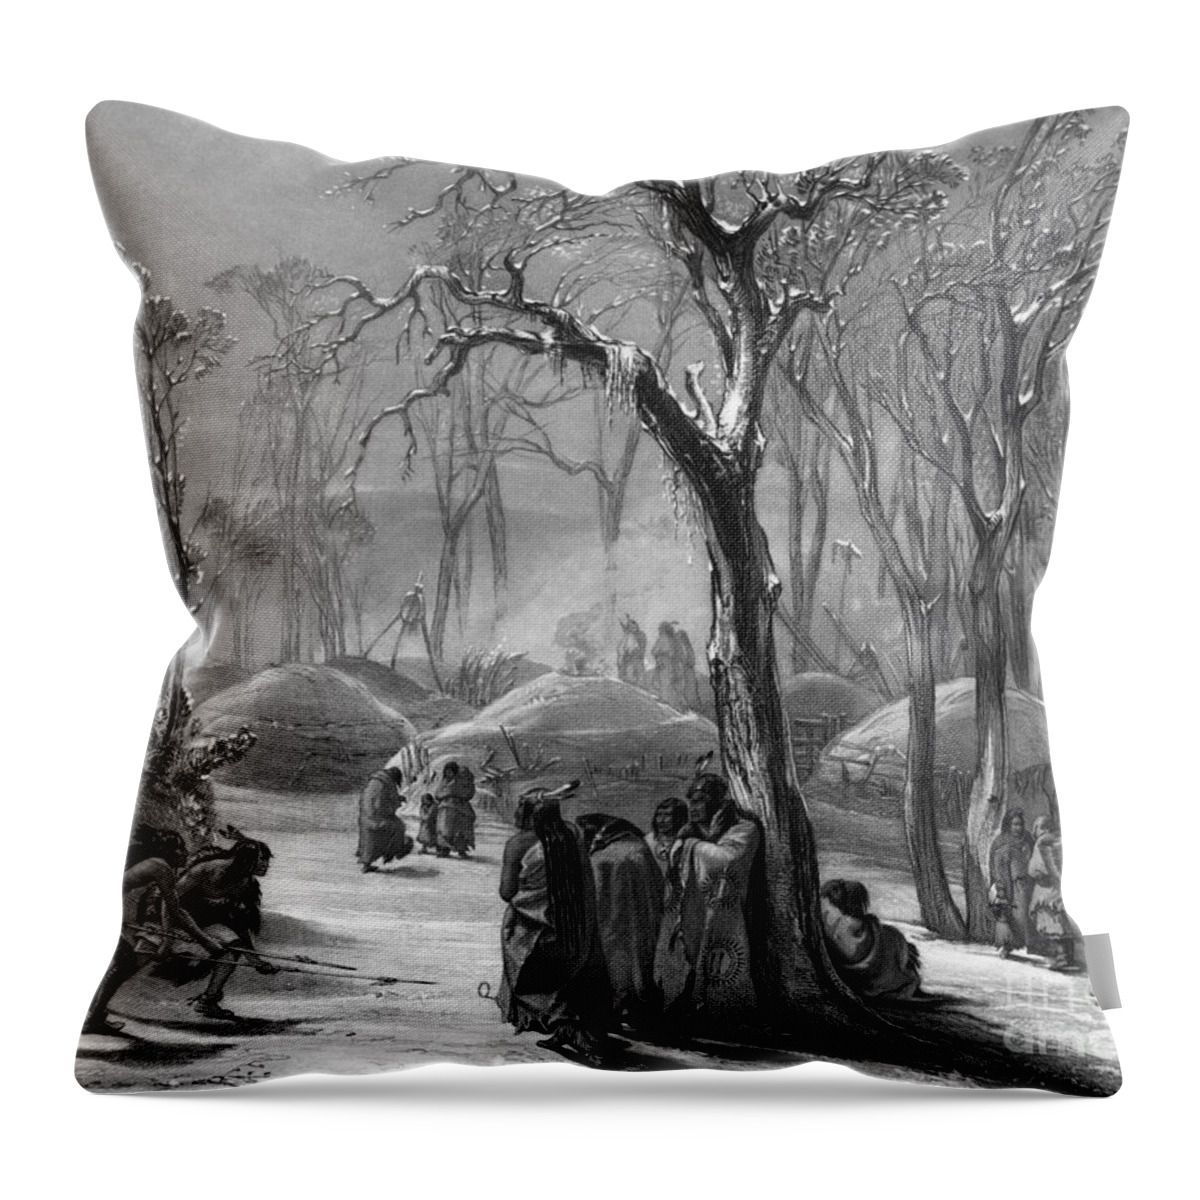 1840 Throw Pillow featuring the drawing Winter Village, c1840 by Karl Bodmer